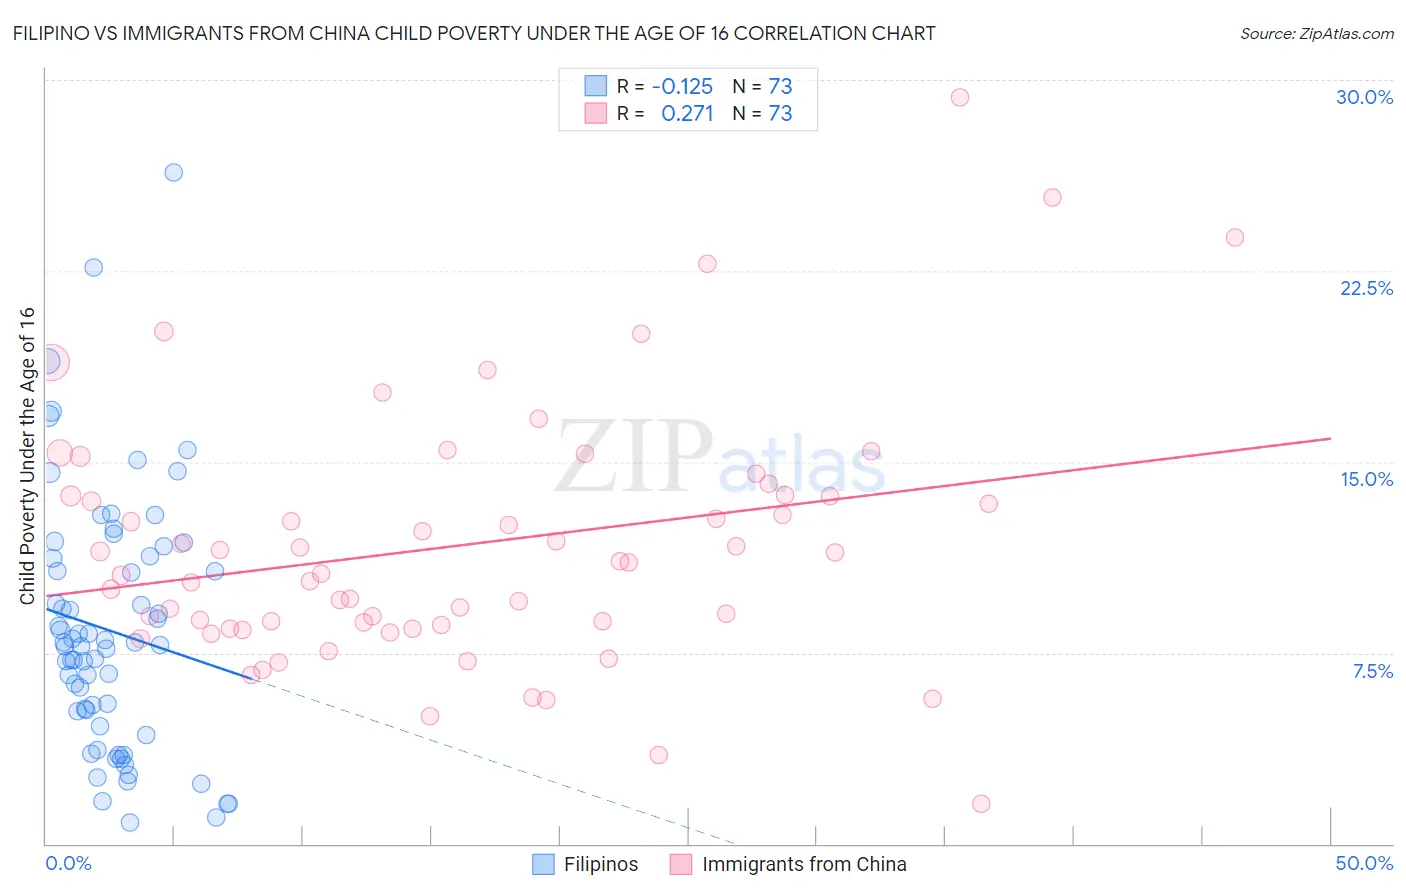 Filipino vs Immigrants from China Child Poverty Under the Age of 16